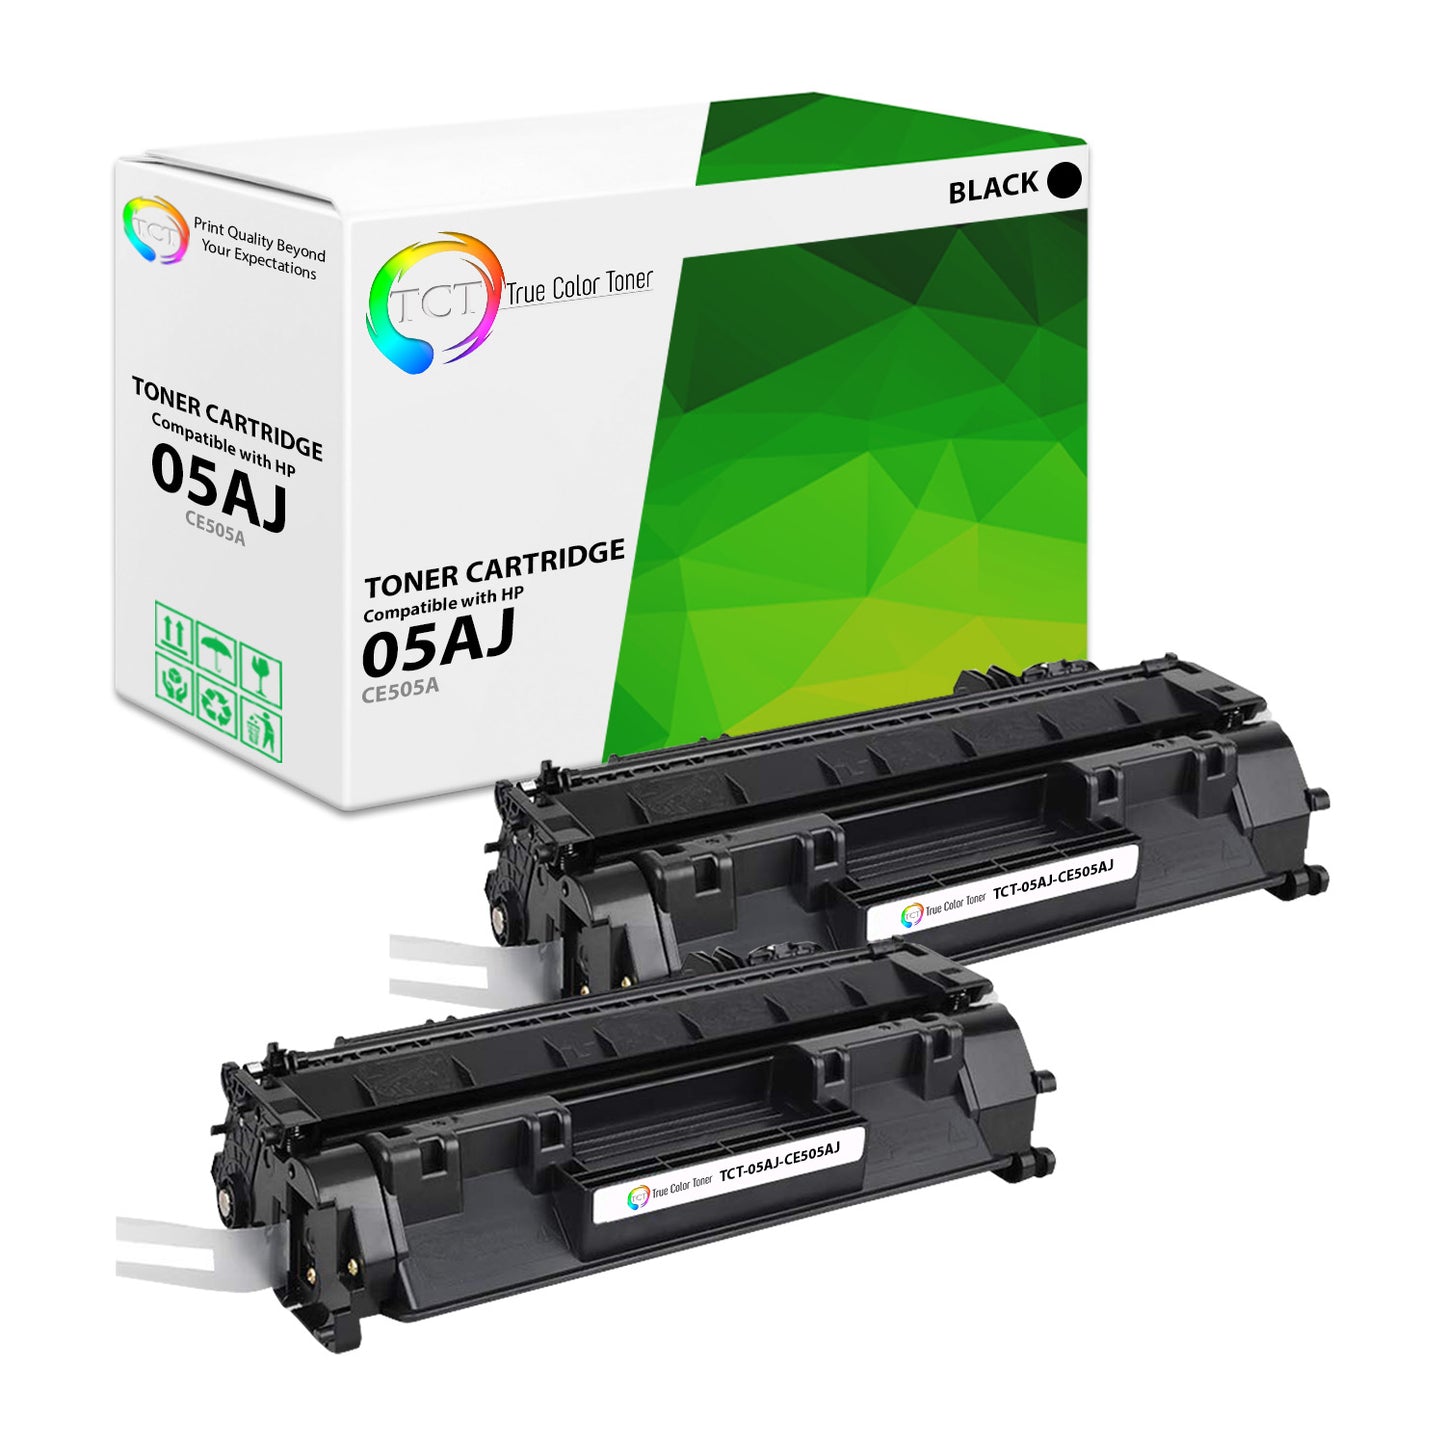 TCT Compatible Jumbo Toner Cartridge Replacement for the HP 05AJ Series - 2 Pack Black